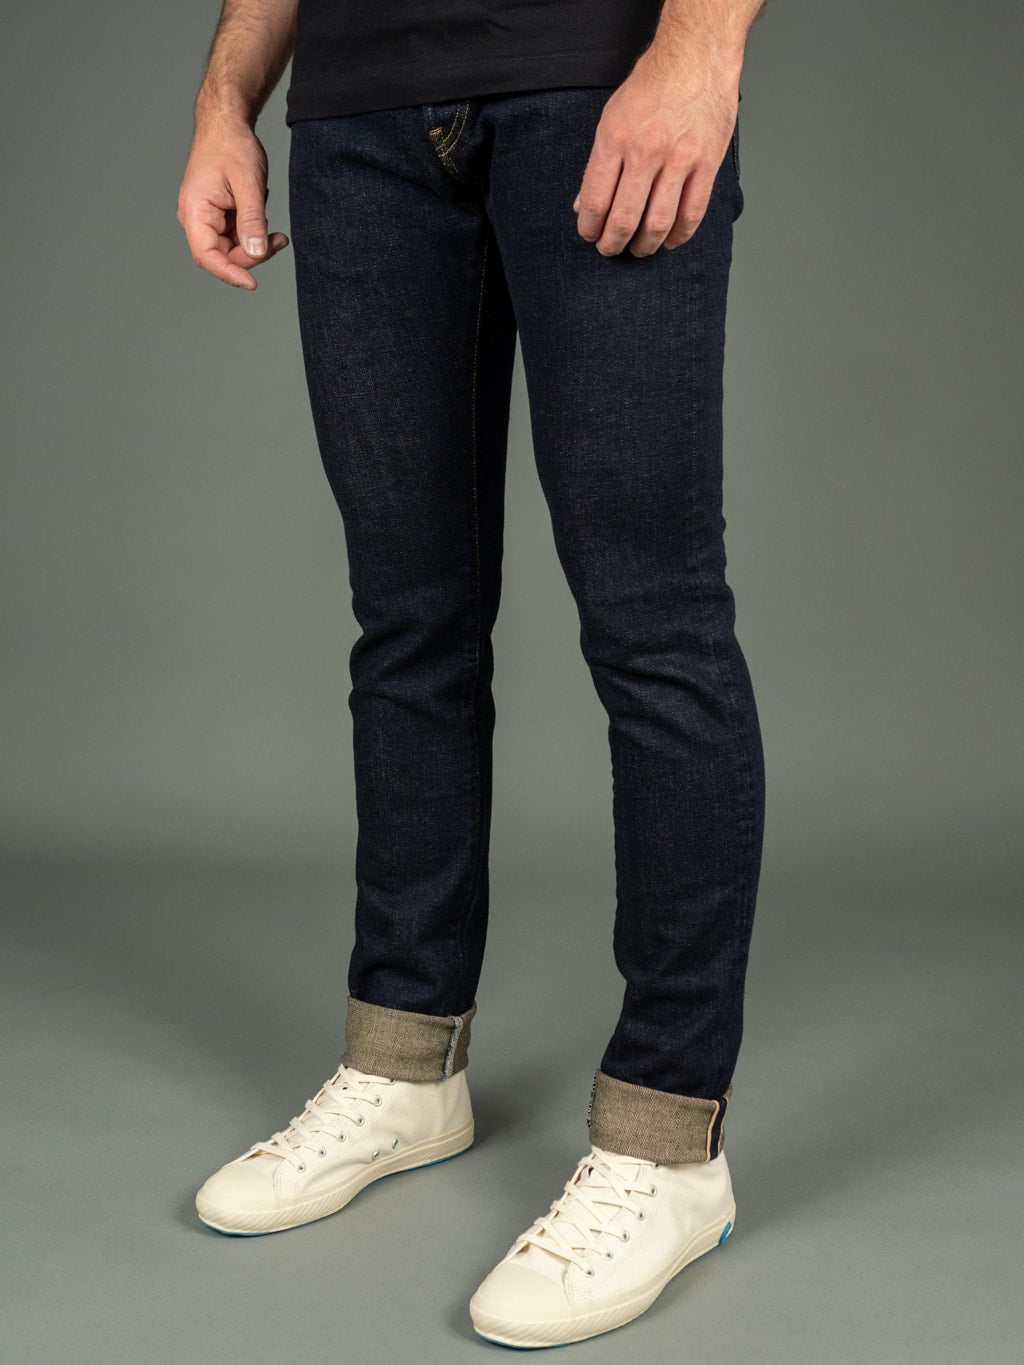 ONI Denim Beige Overdye Stretch Relax Tapered Jeans Side